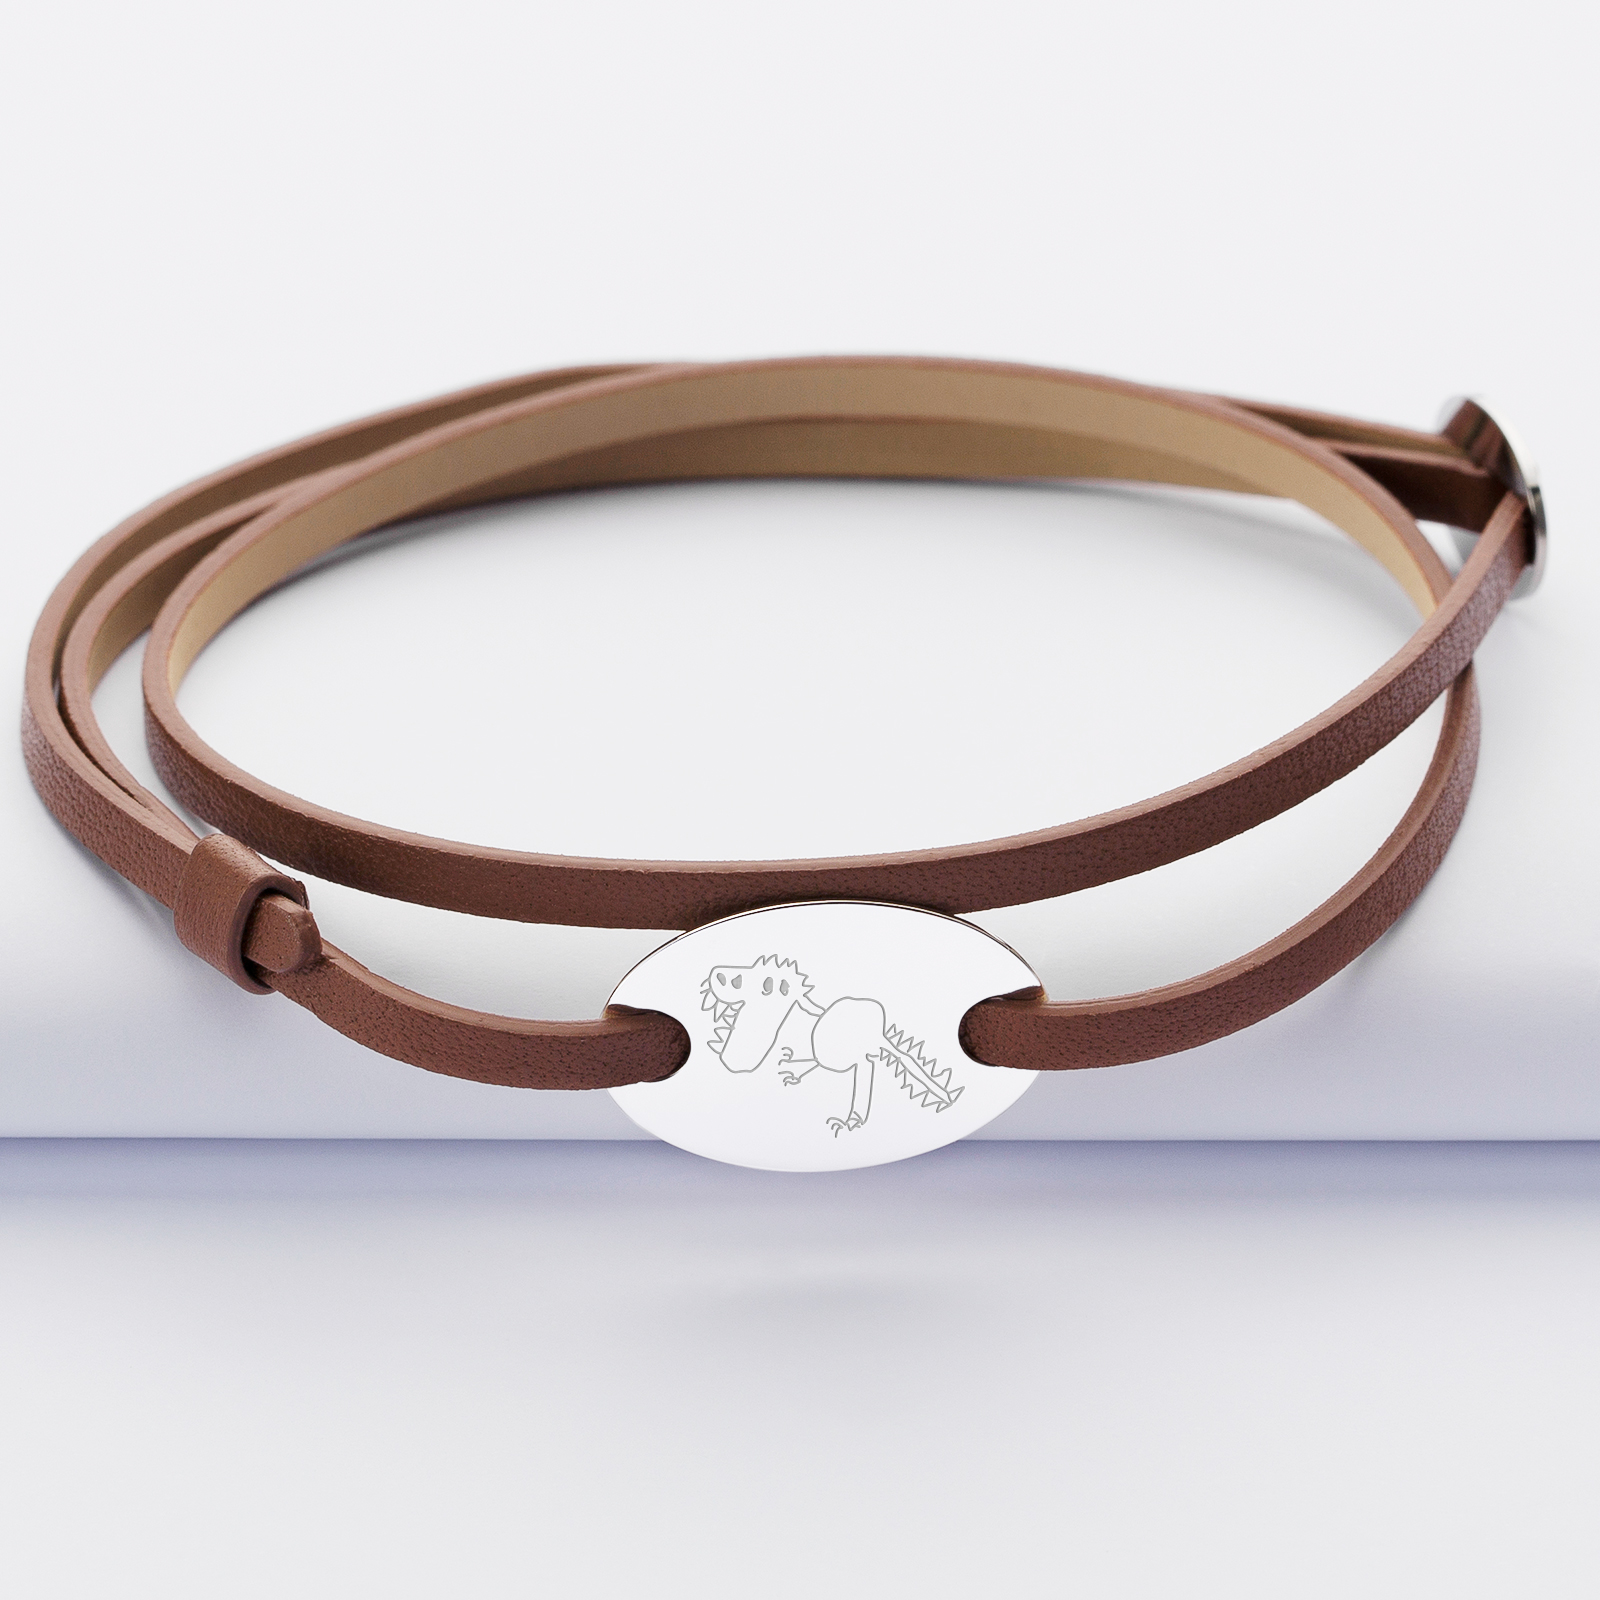 Gents 2-turn leather bracelet with personalised engraved oval 2-hole silver medallion 25x16mm sketch